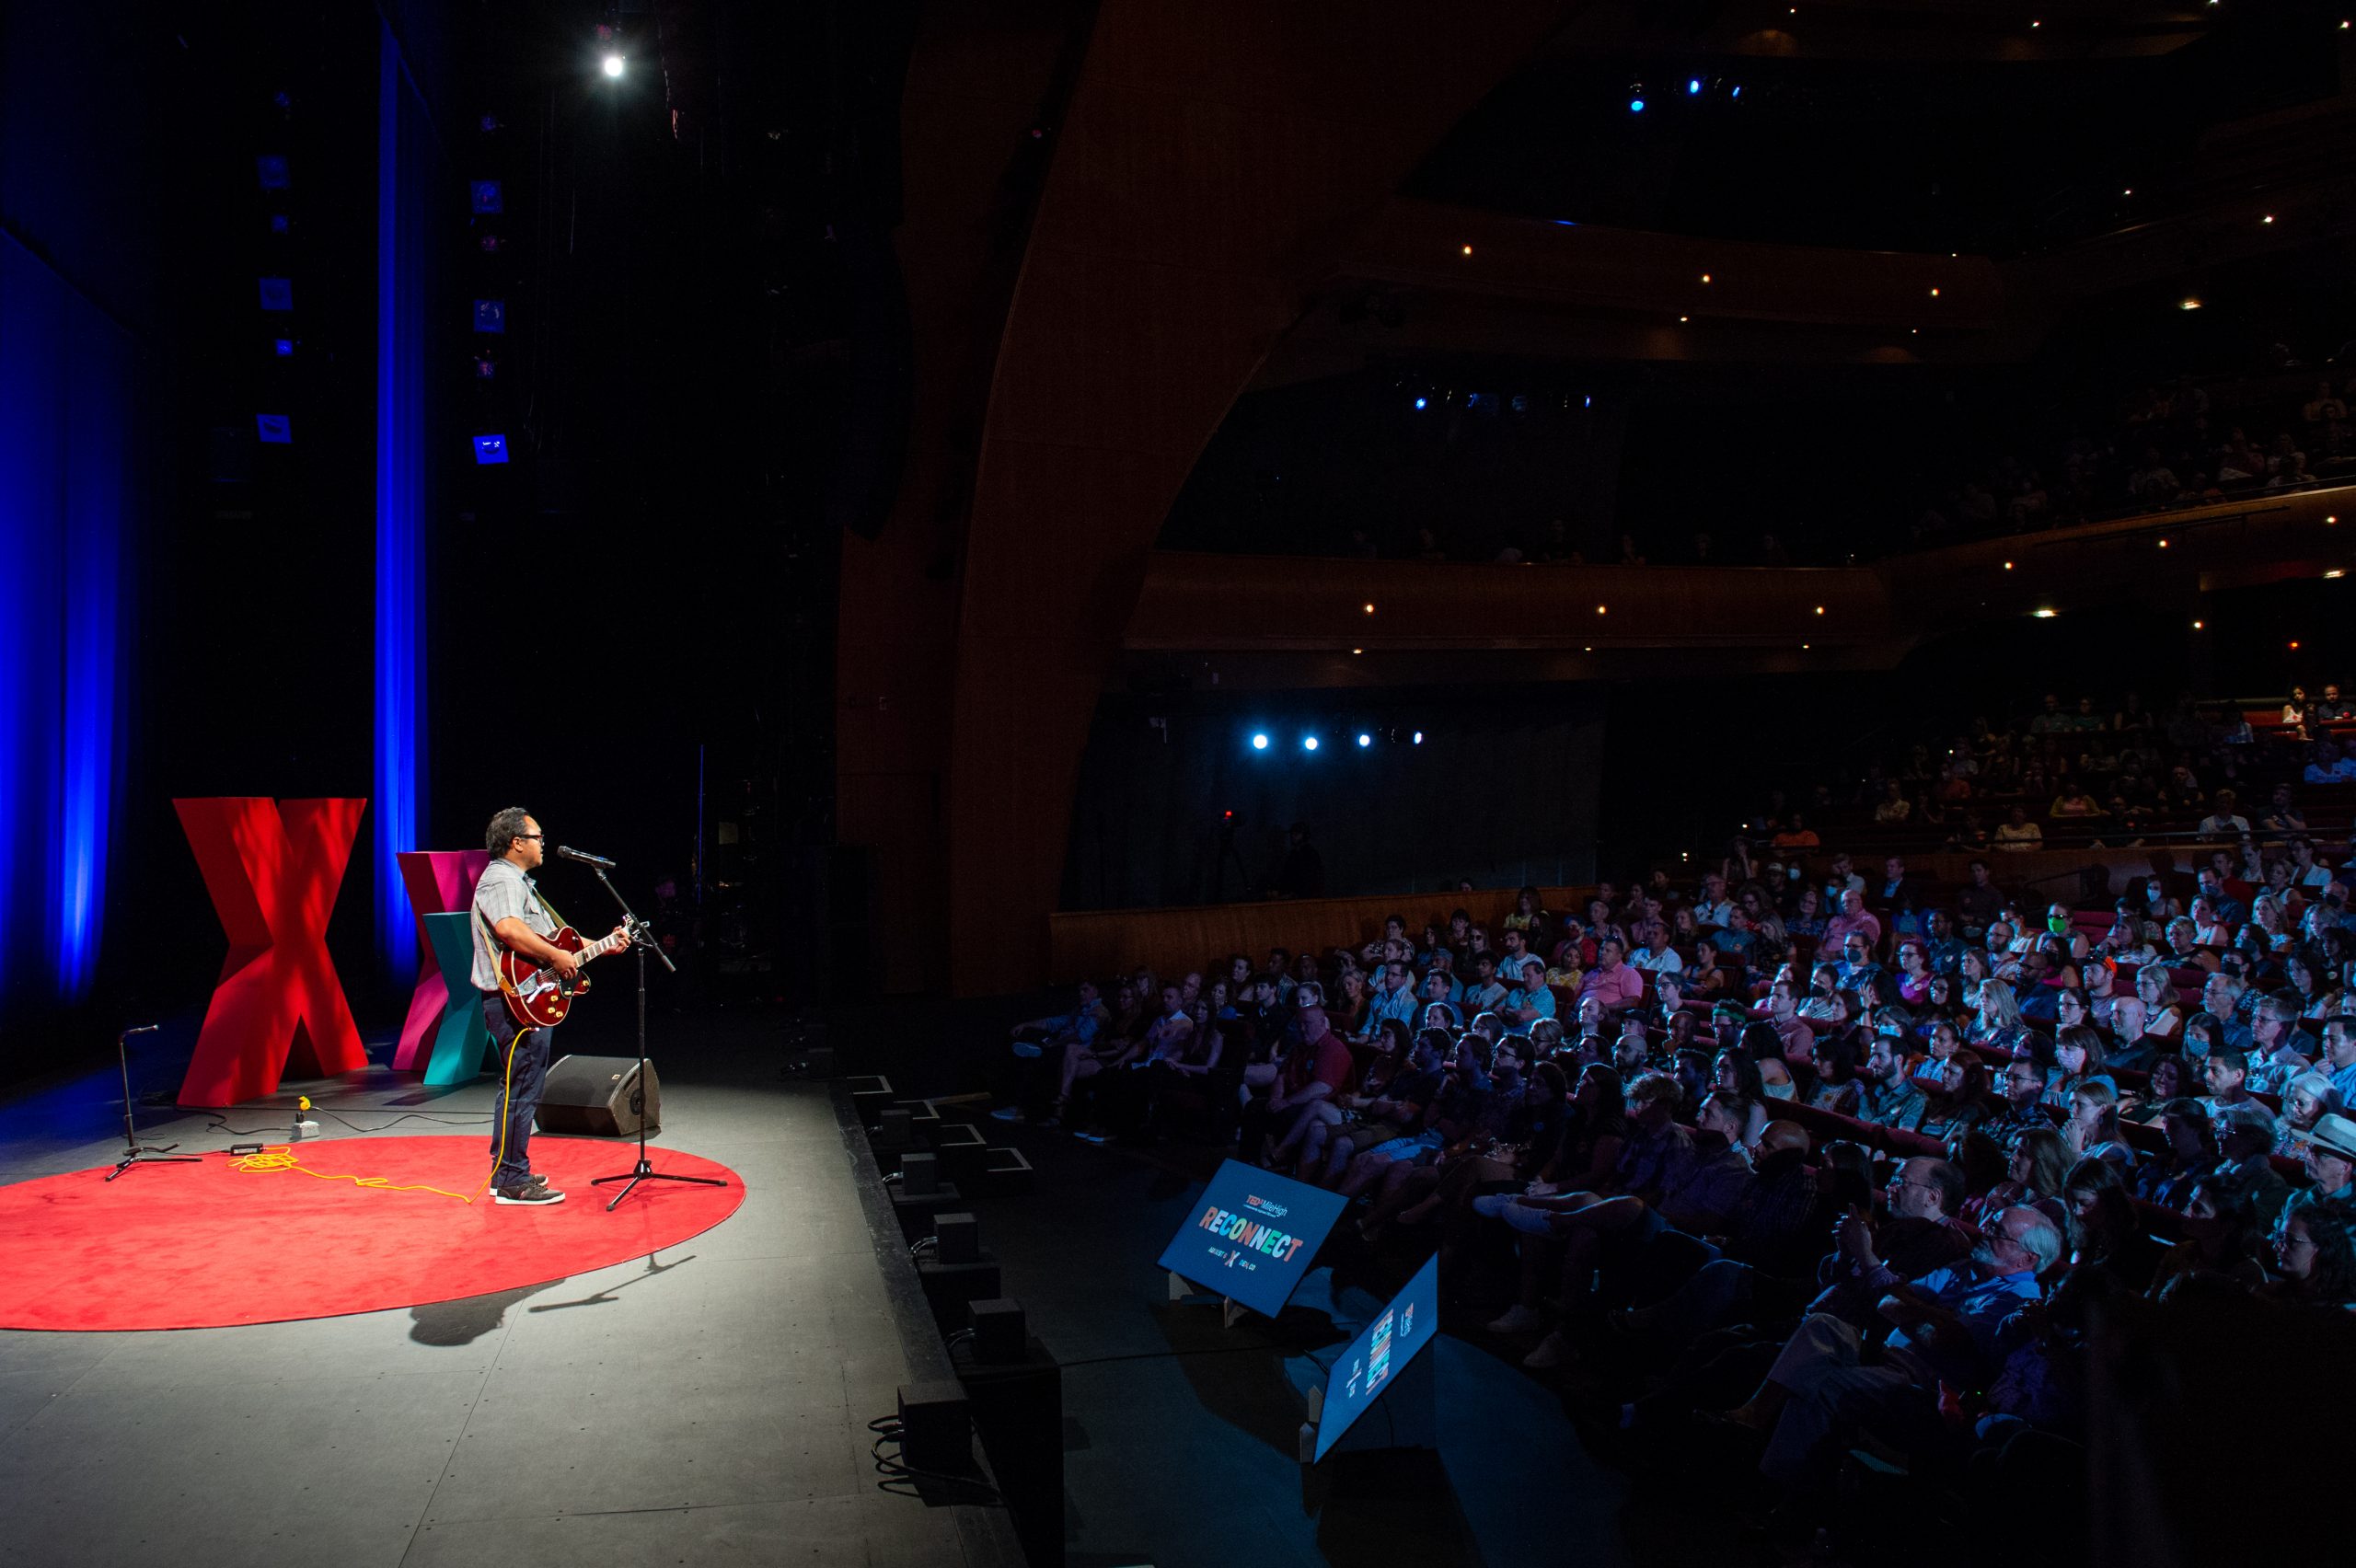 That time I played TEDxMileHigh